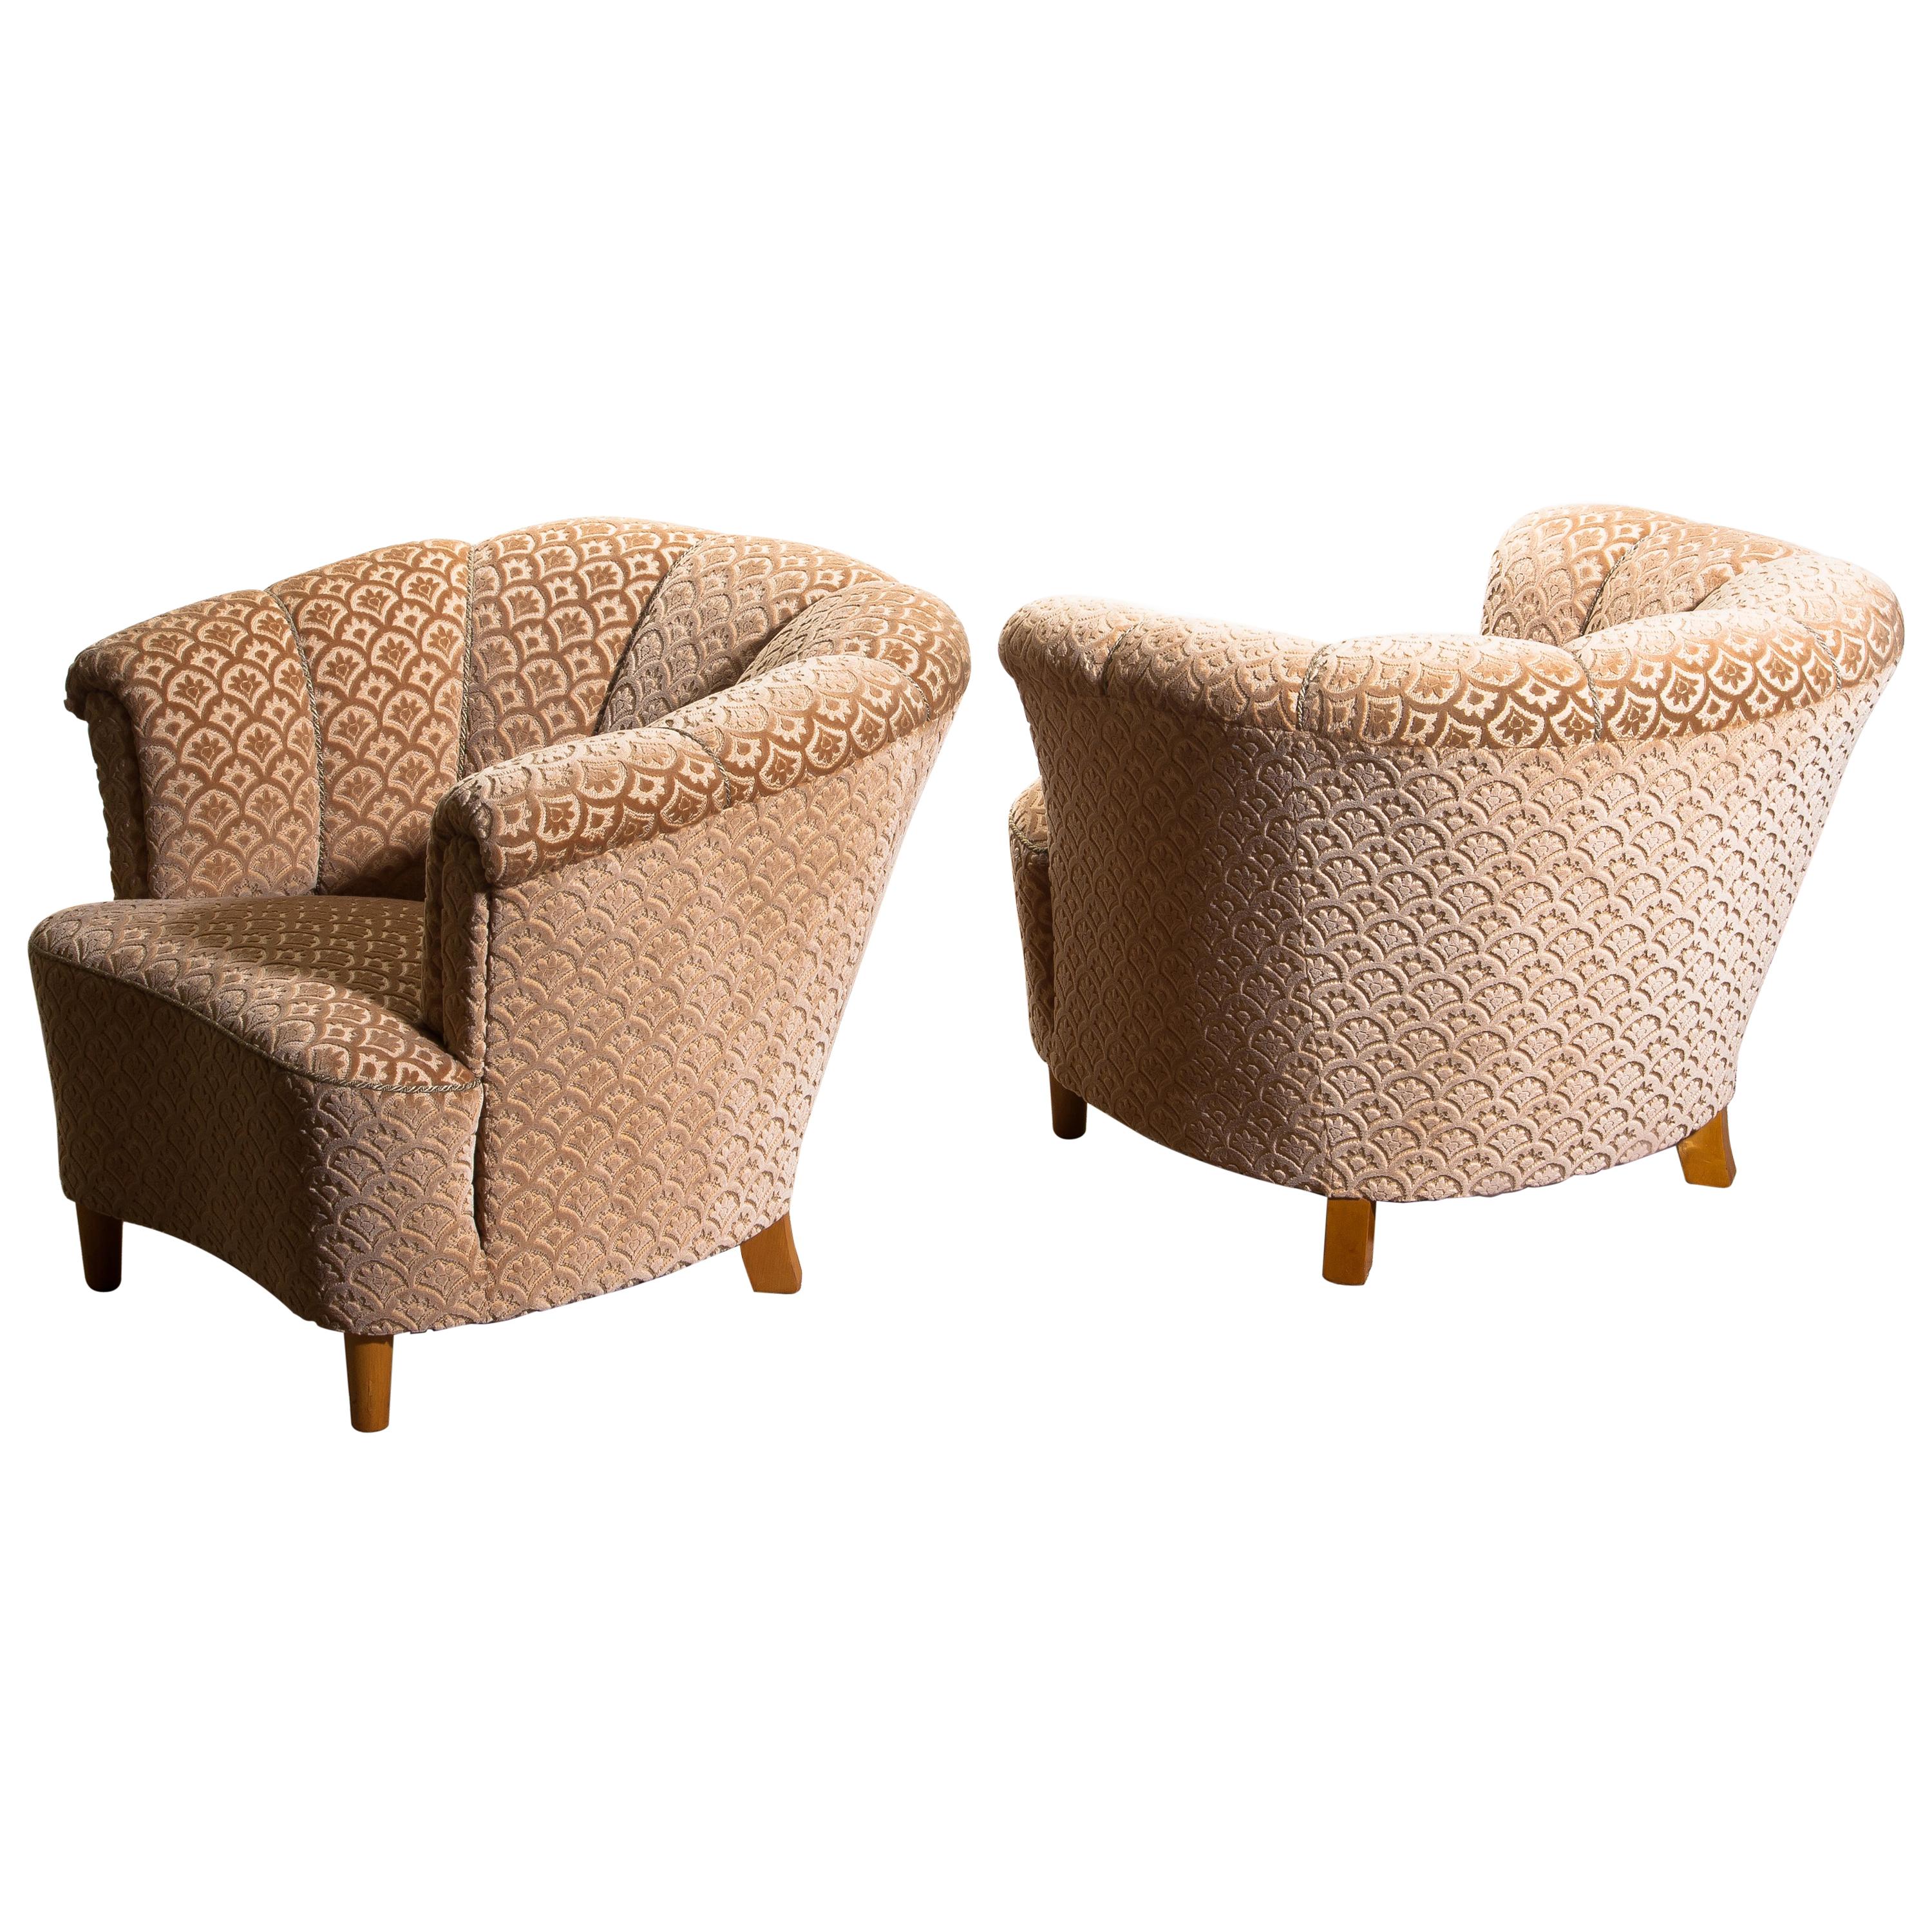 Beautiful set of two comfortable club lounge cocktail chairs from the 1940s.
Both chairs are in original and excellent condition.
The chairs are richly upholstered in flocked velvet and standing on beech legs.
  